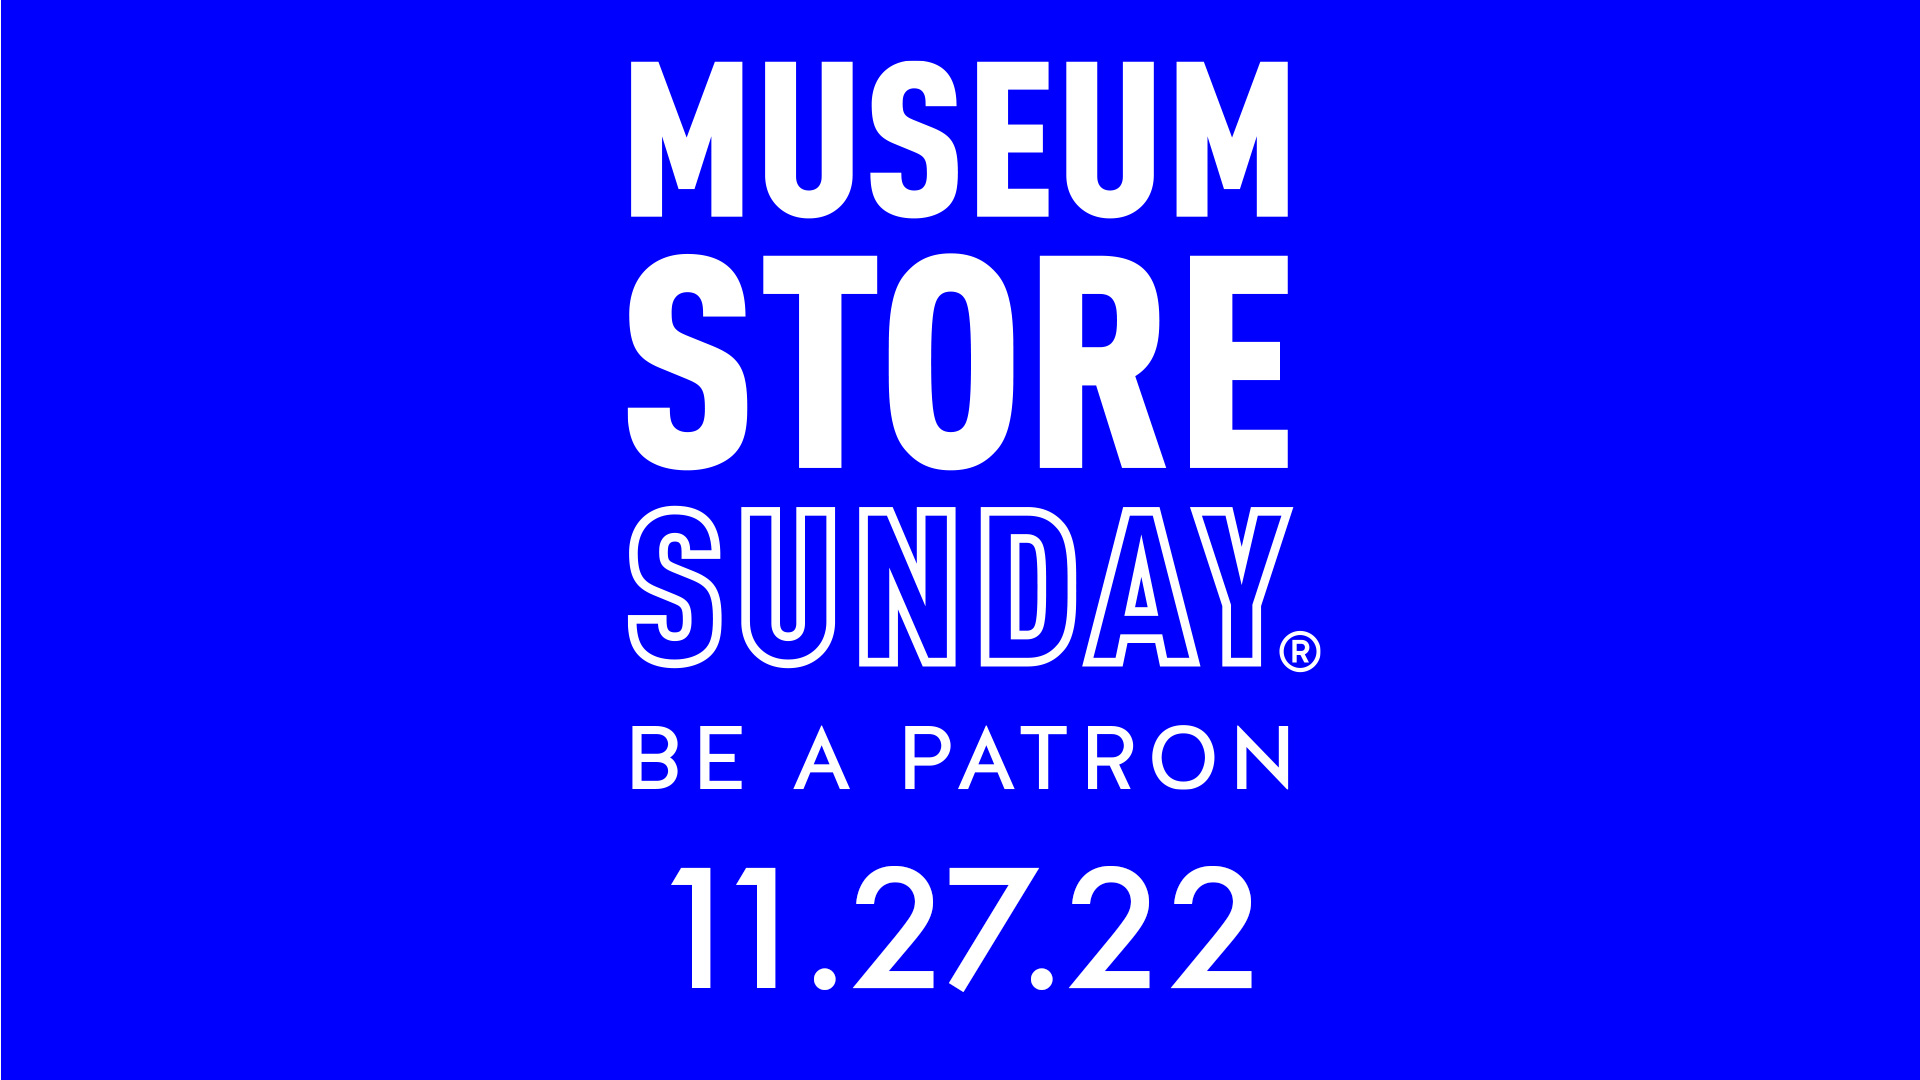 Museum Store Sunday on 11.27.2022 written in white text on a blue background